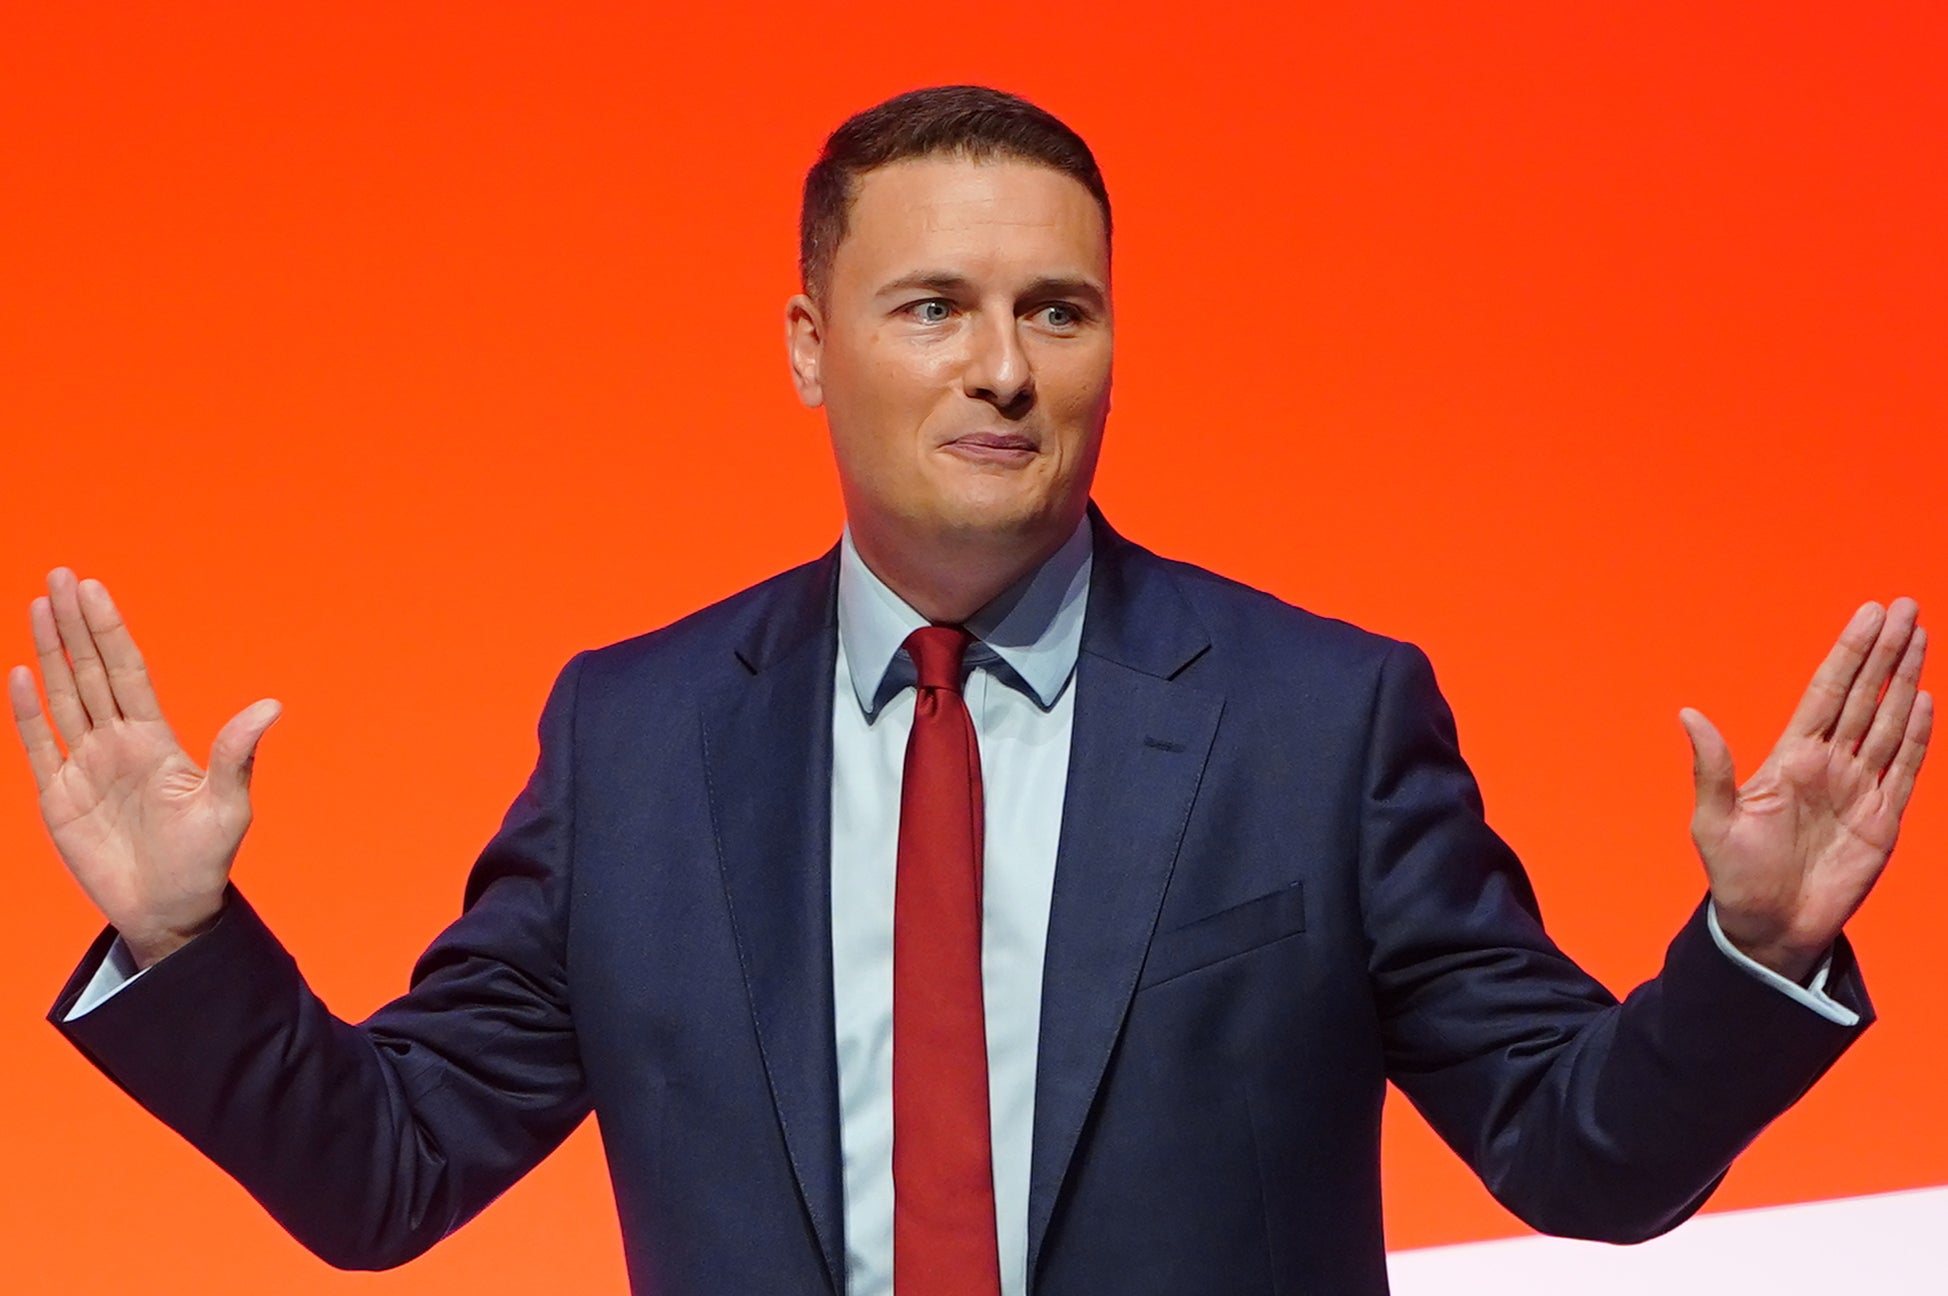 Shadow health secretary Wes Streeting says hospital leaders must be asked ‘urgent questions’ over sexual assault figures